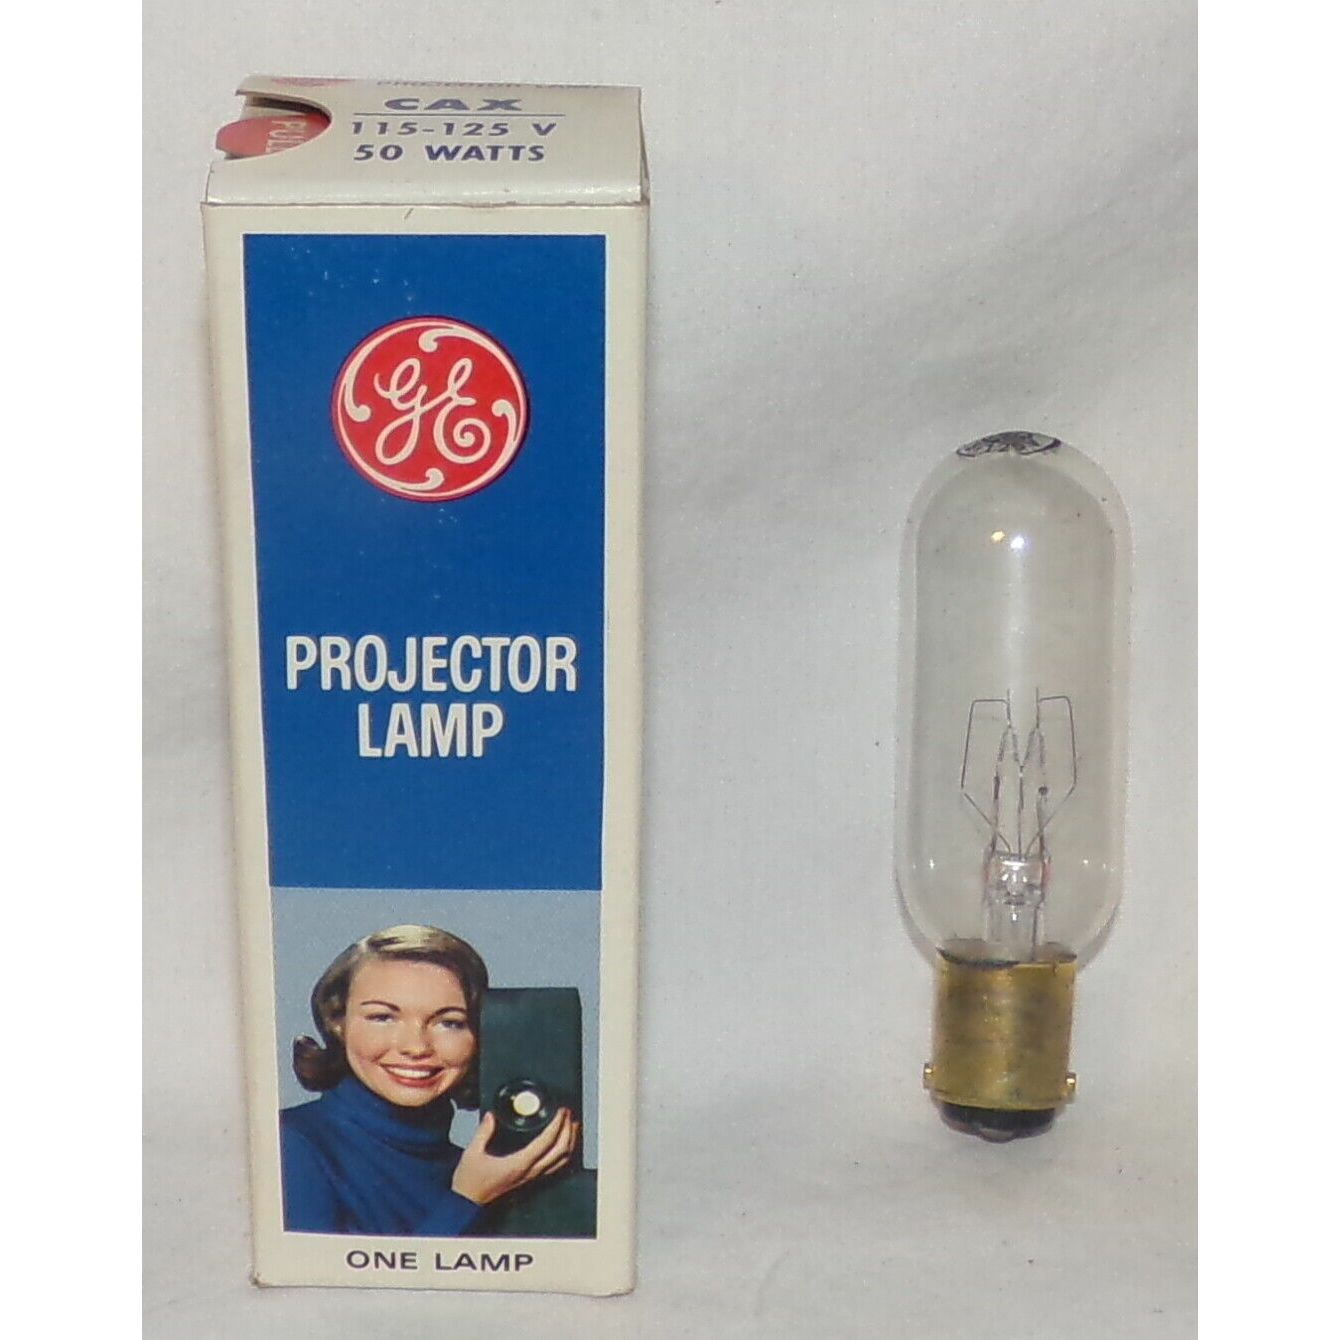 GE Projector Lamp Bulb CAX 50W 120V Made in USA New Old Stock